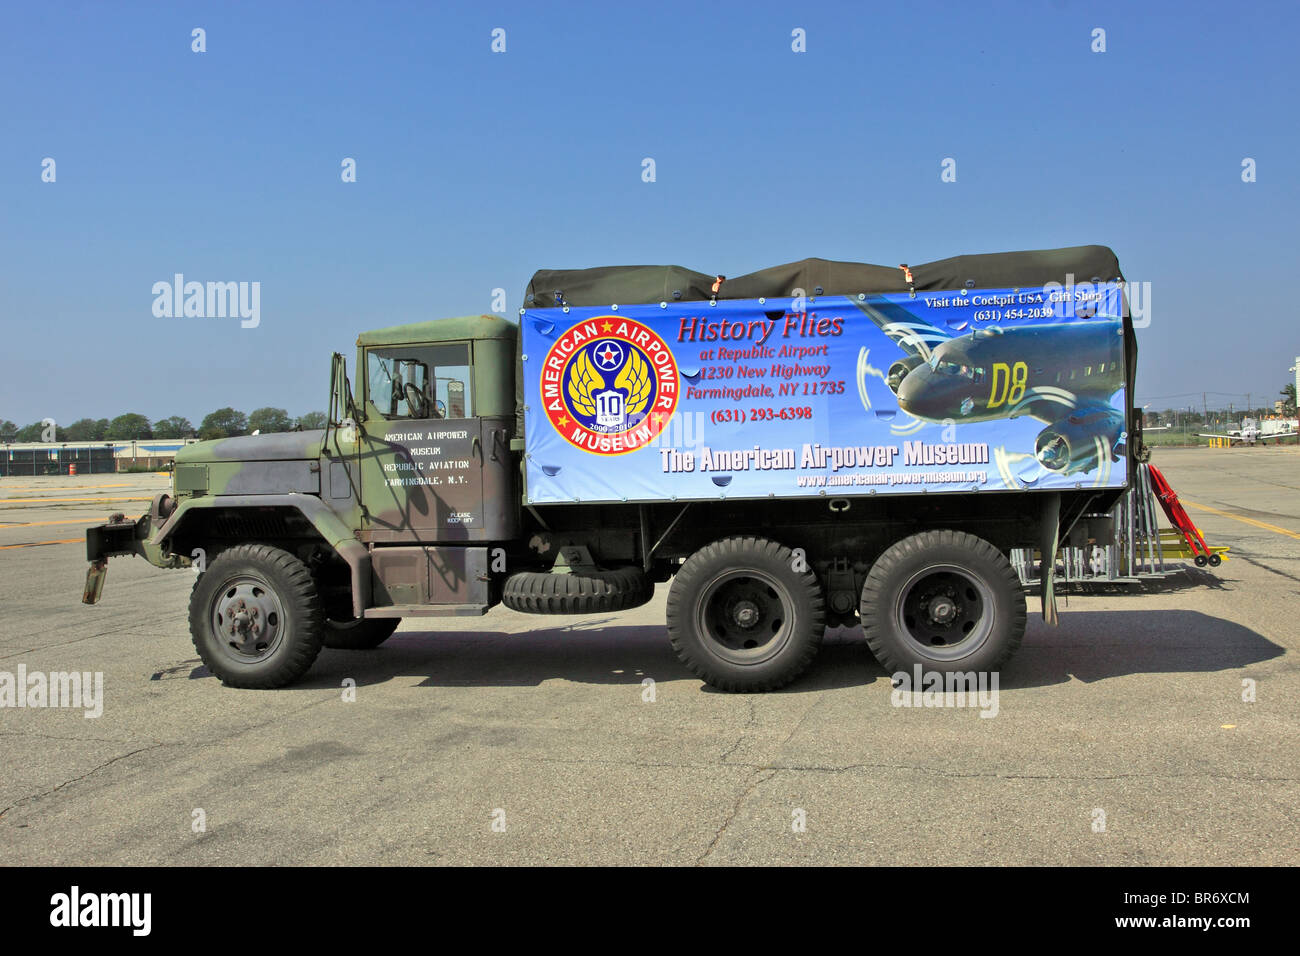 Army truck with American Airpower Museum banner Republic Airport Farmingdale Long Island NY Stock Photo